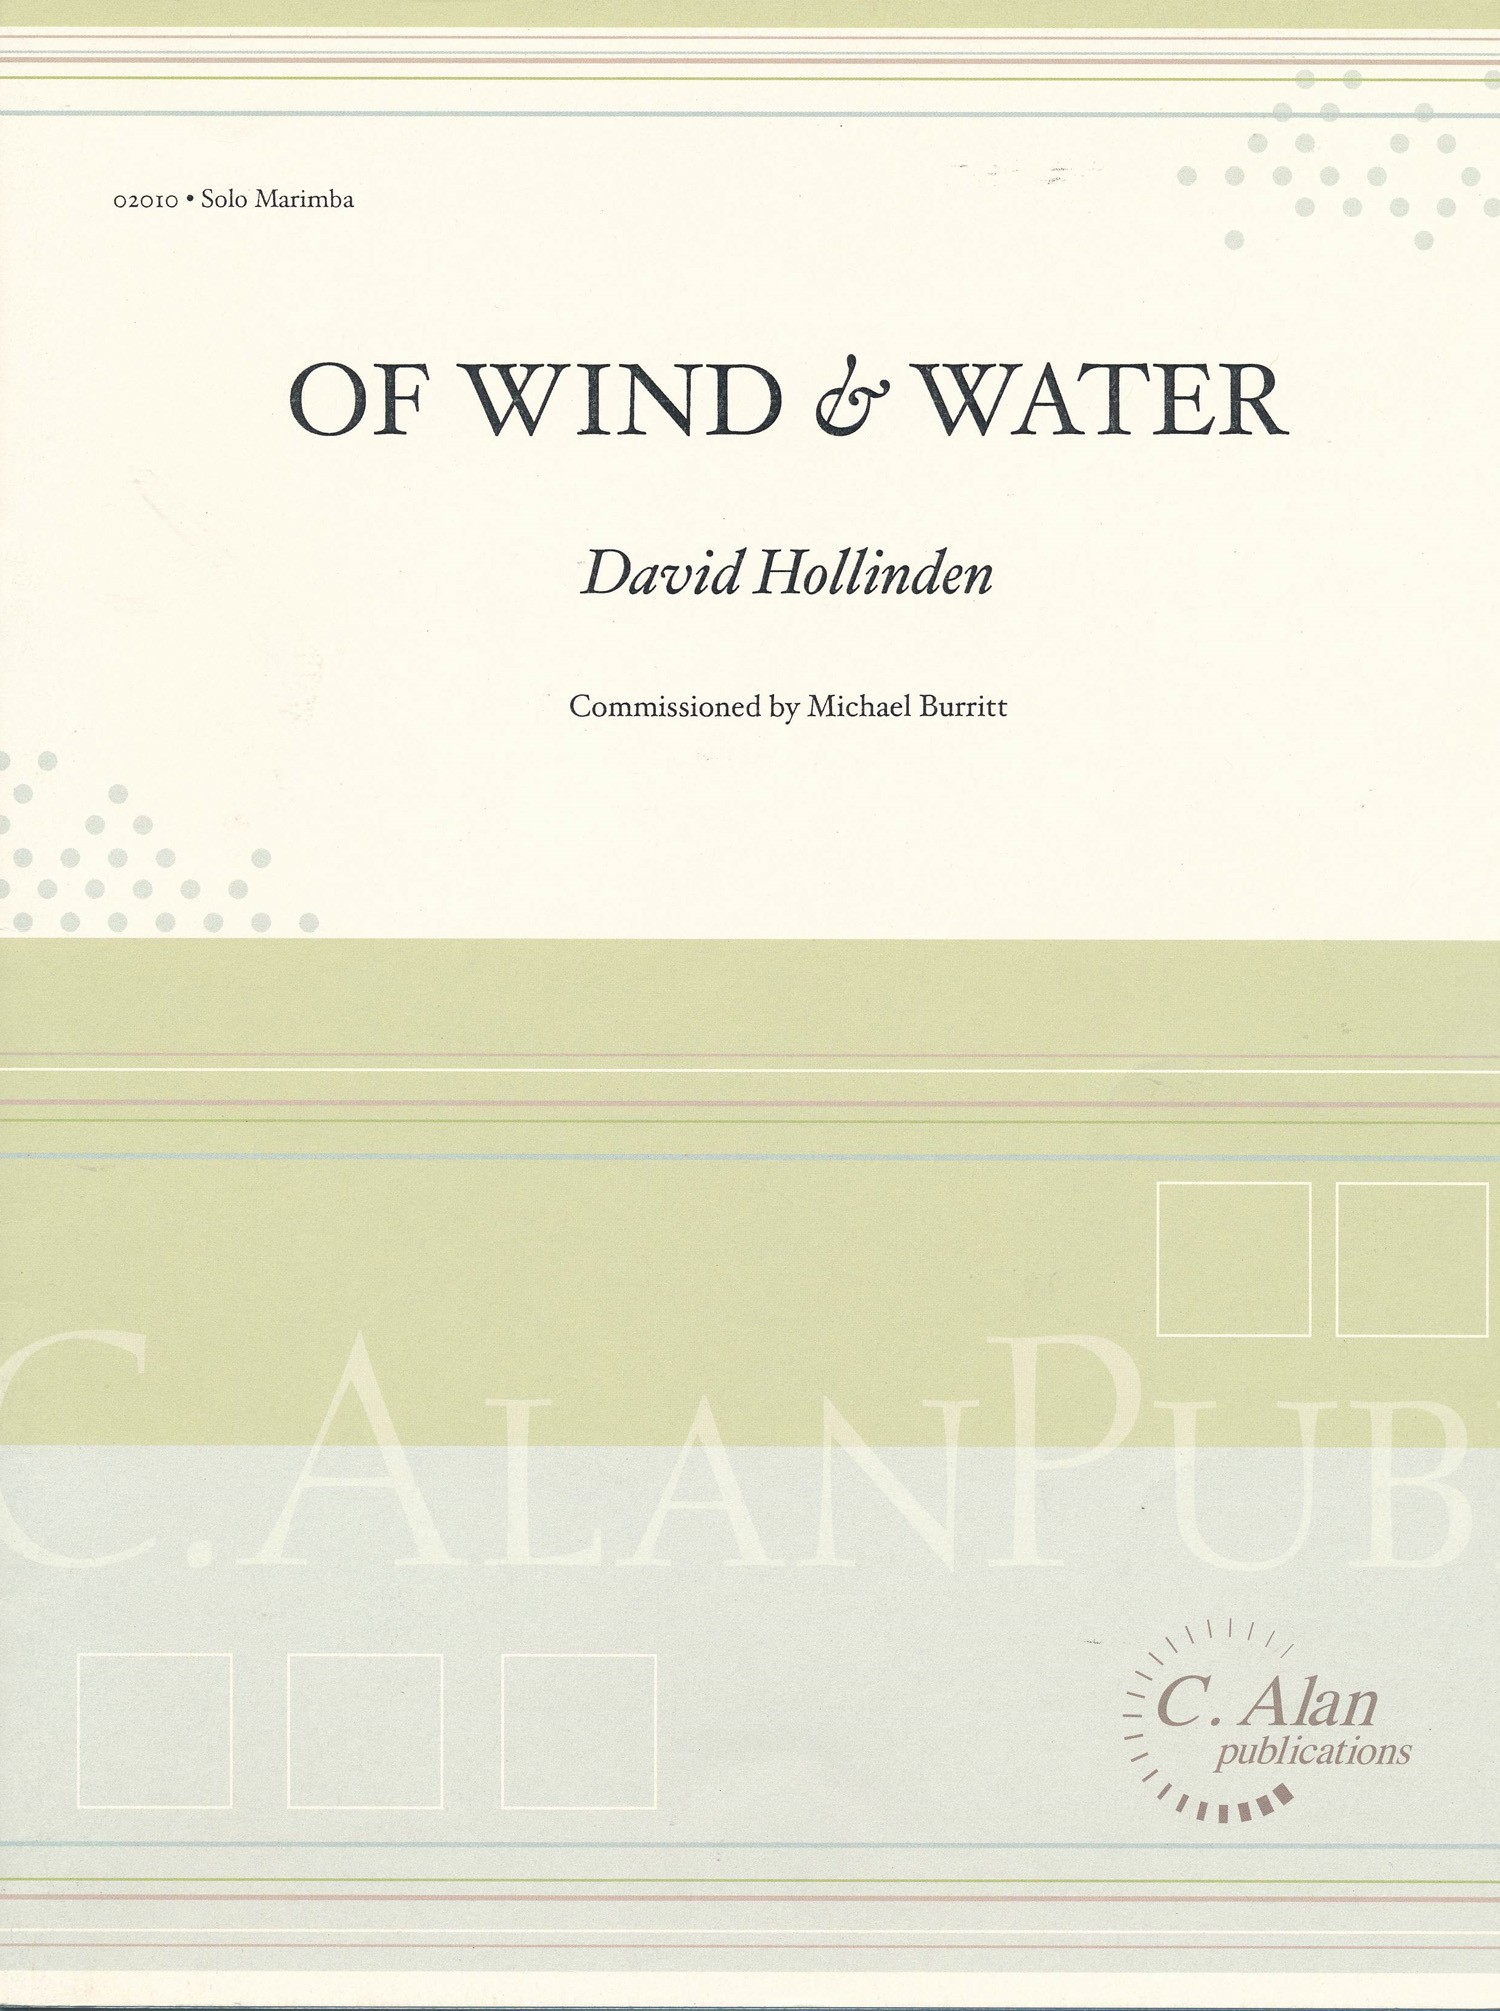 Of Wind & Water by Dave Hollinden